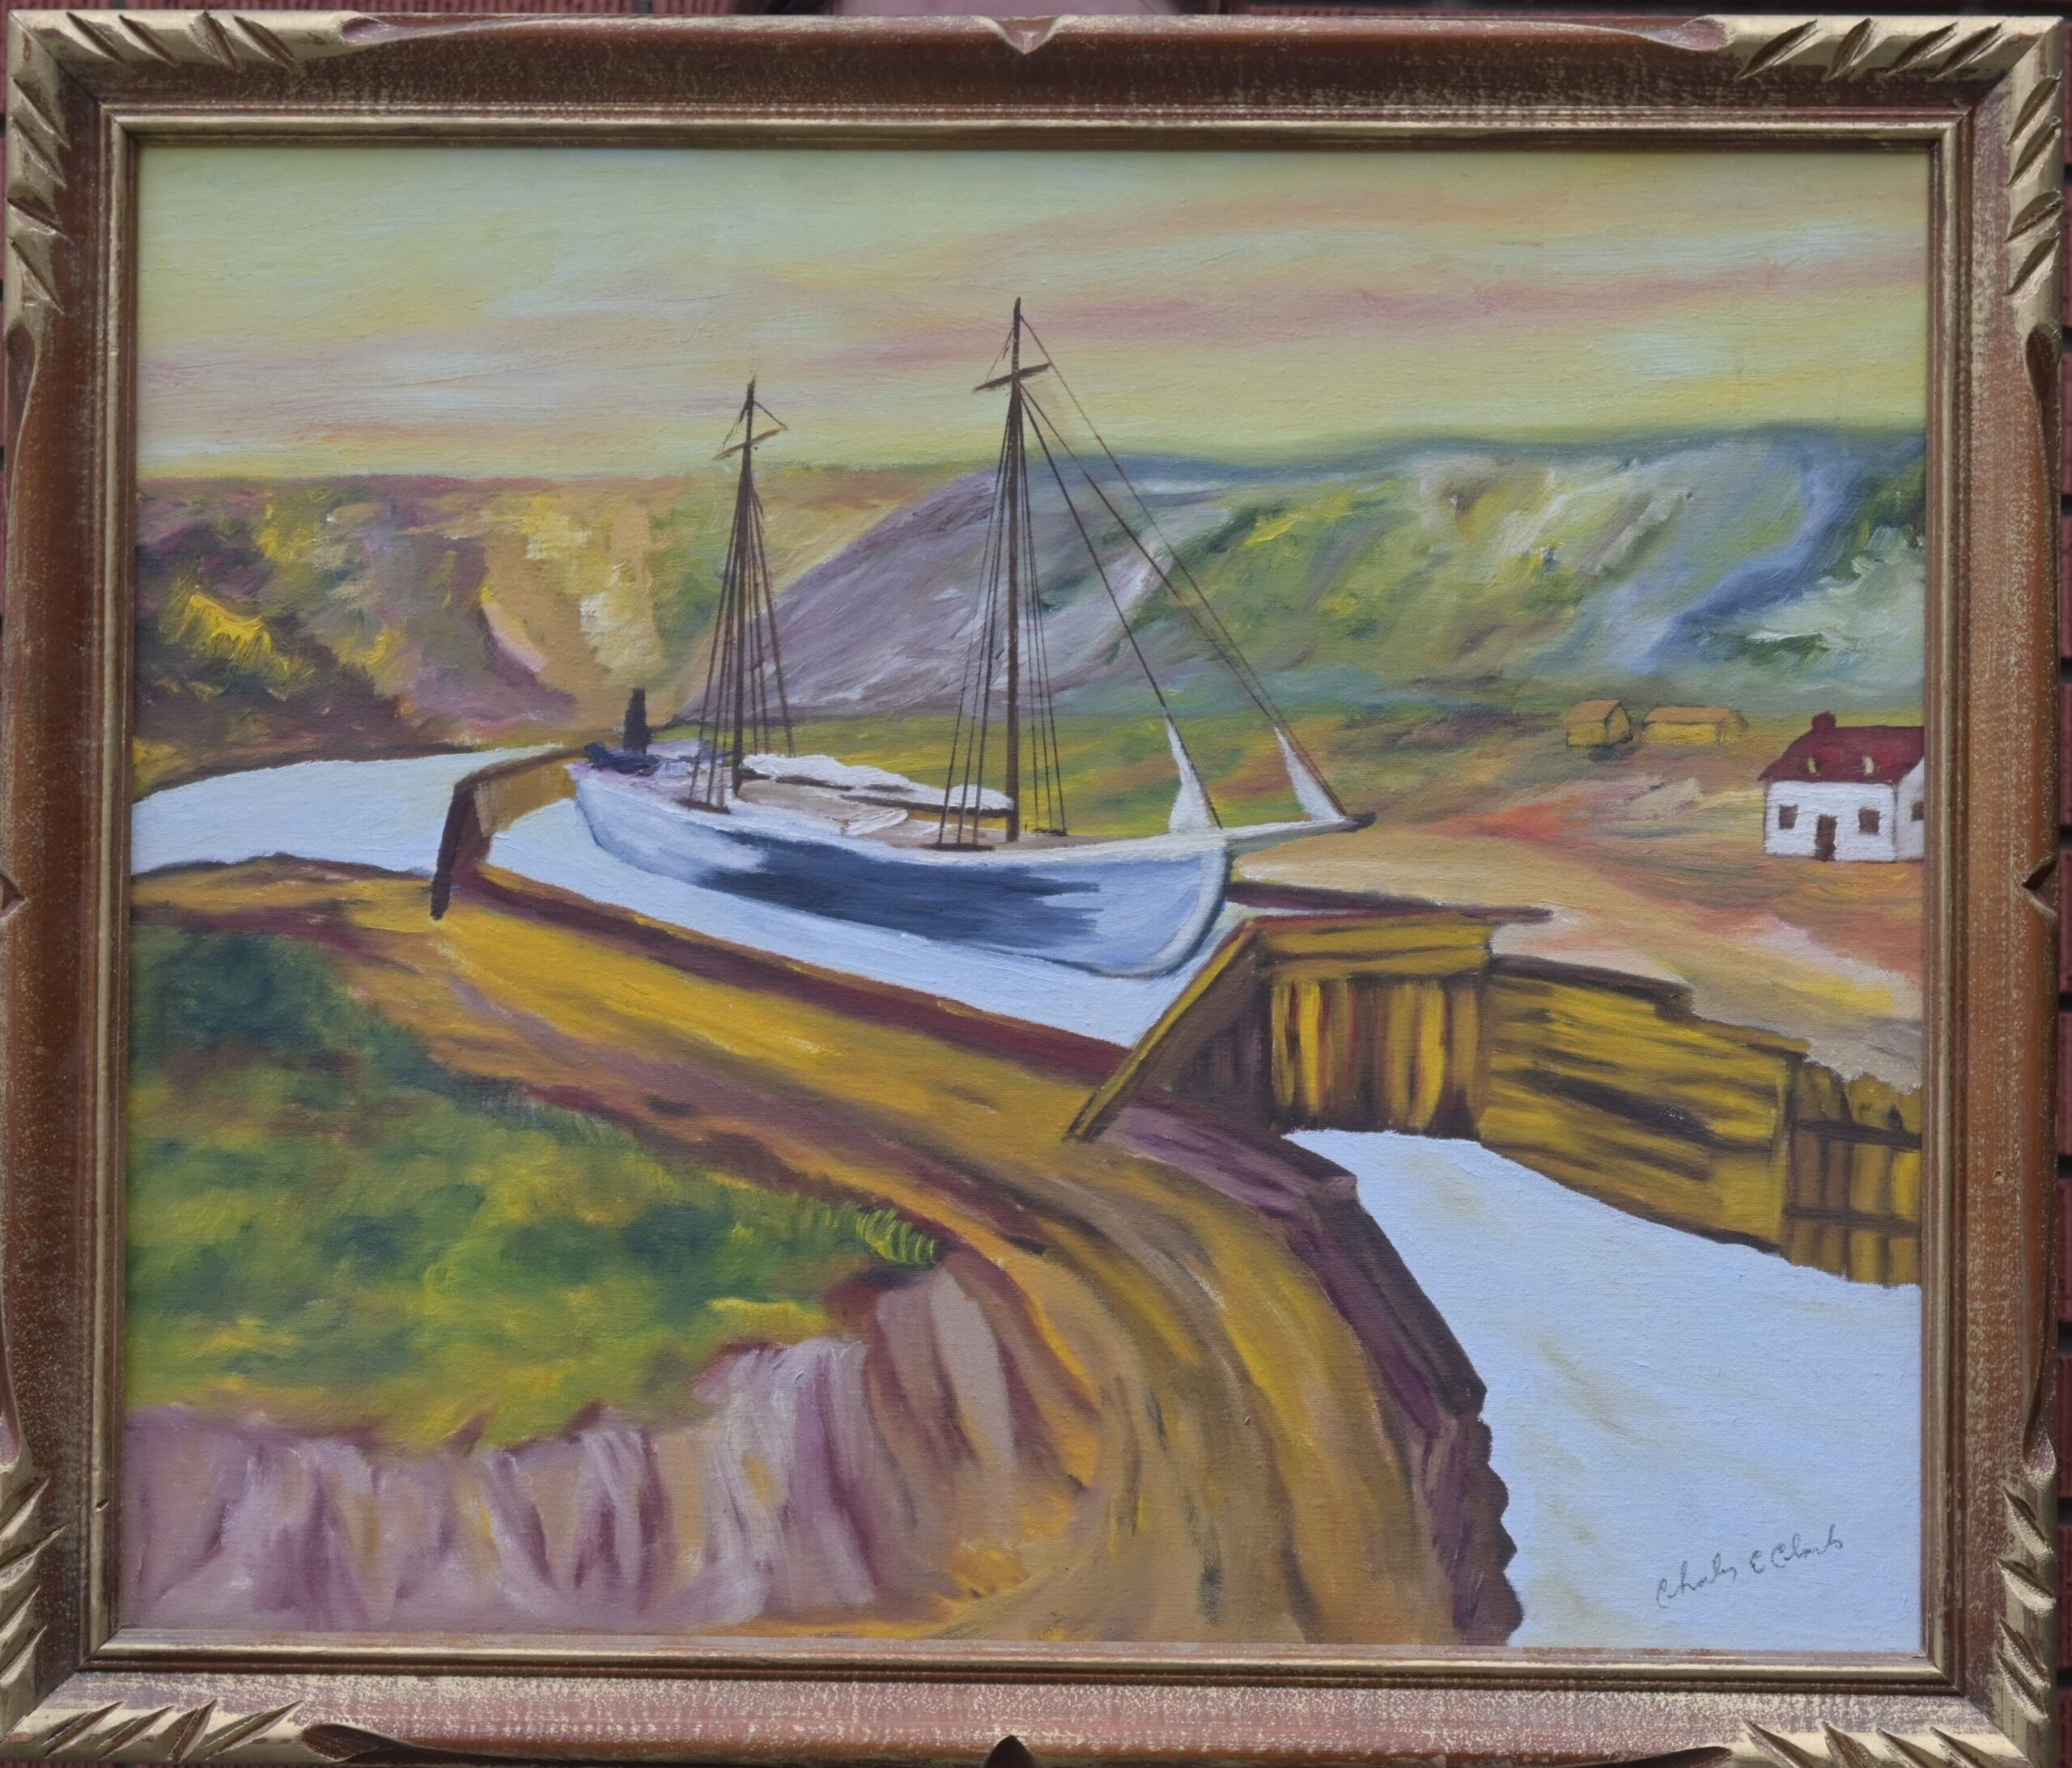 A painting of an old ship with sails in the canal.